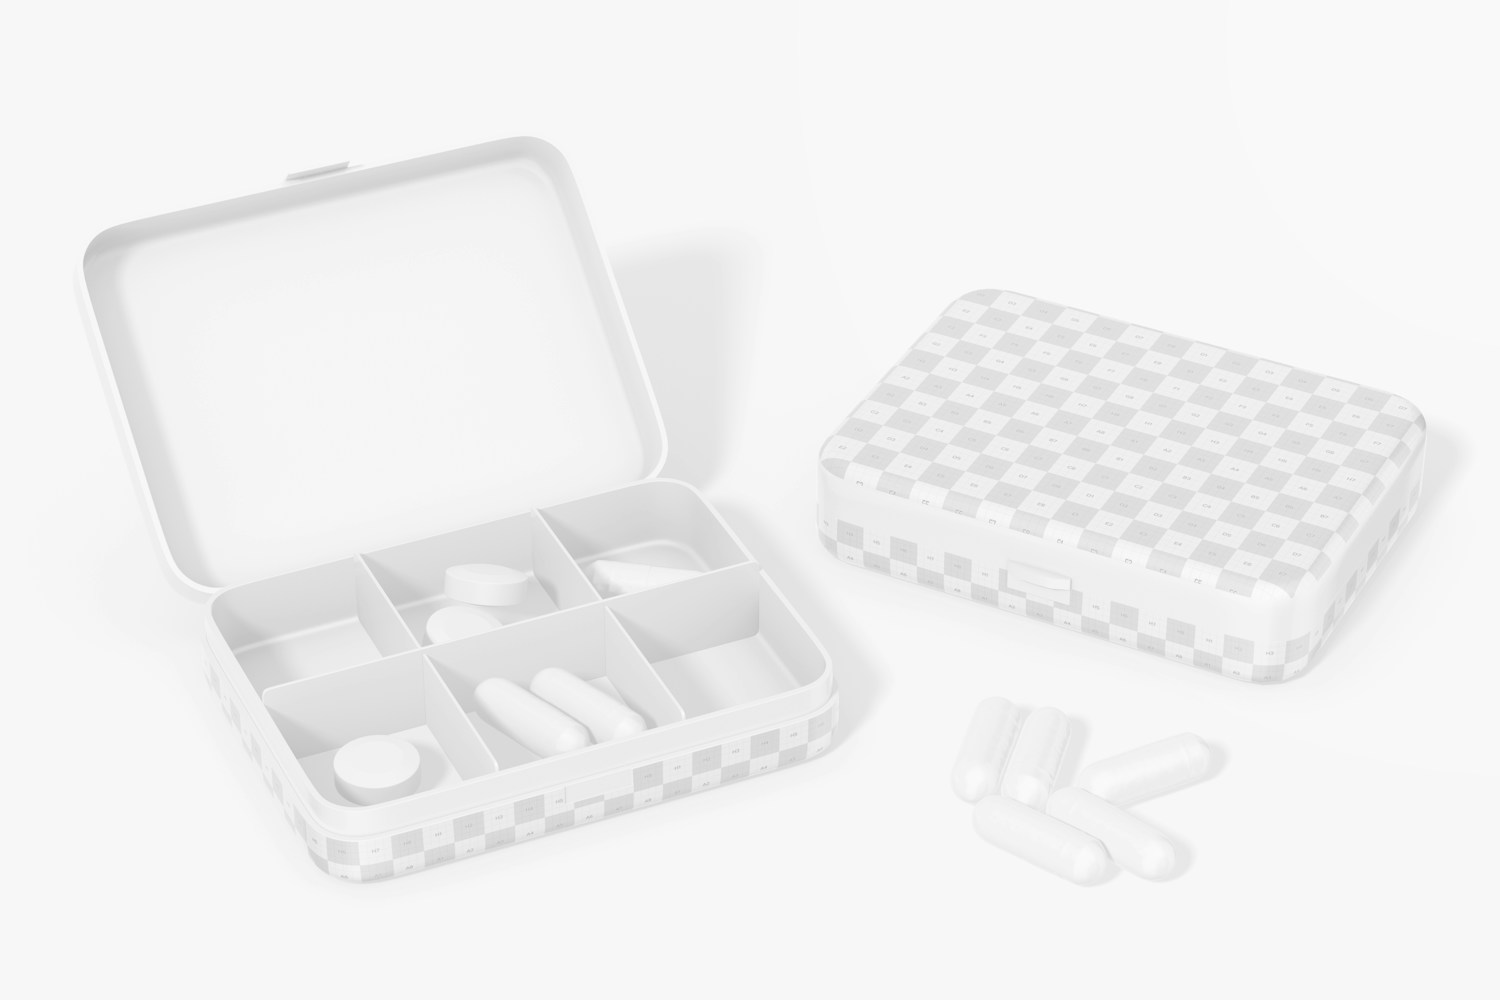 Six Compartment Pill Boxes Mockup